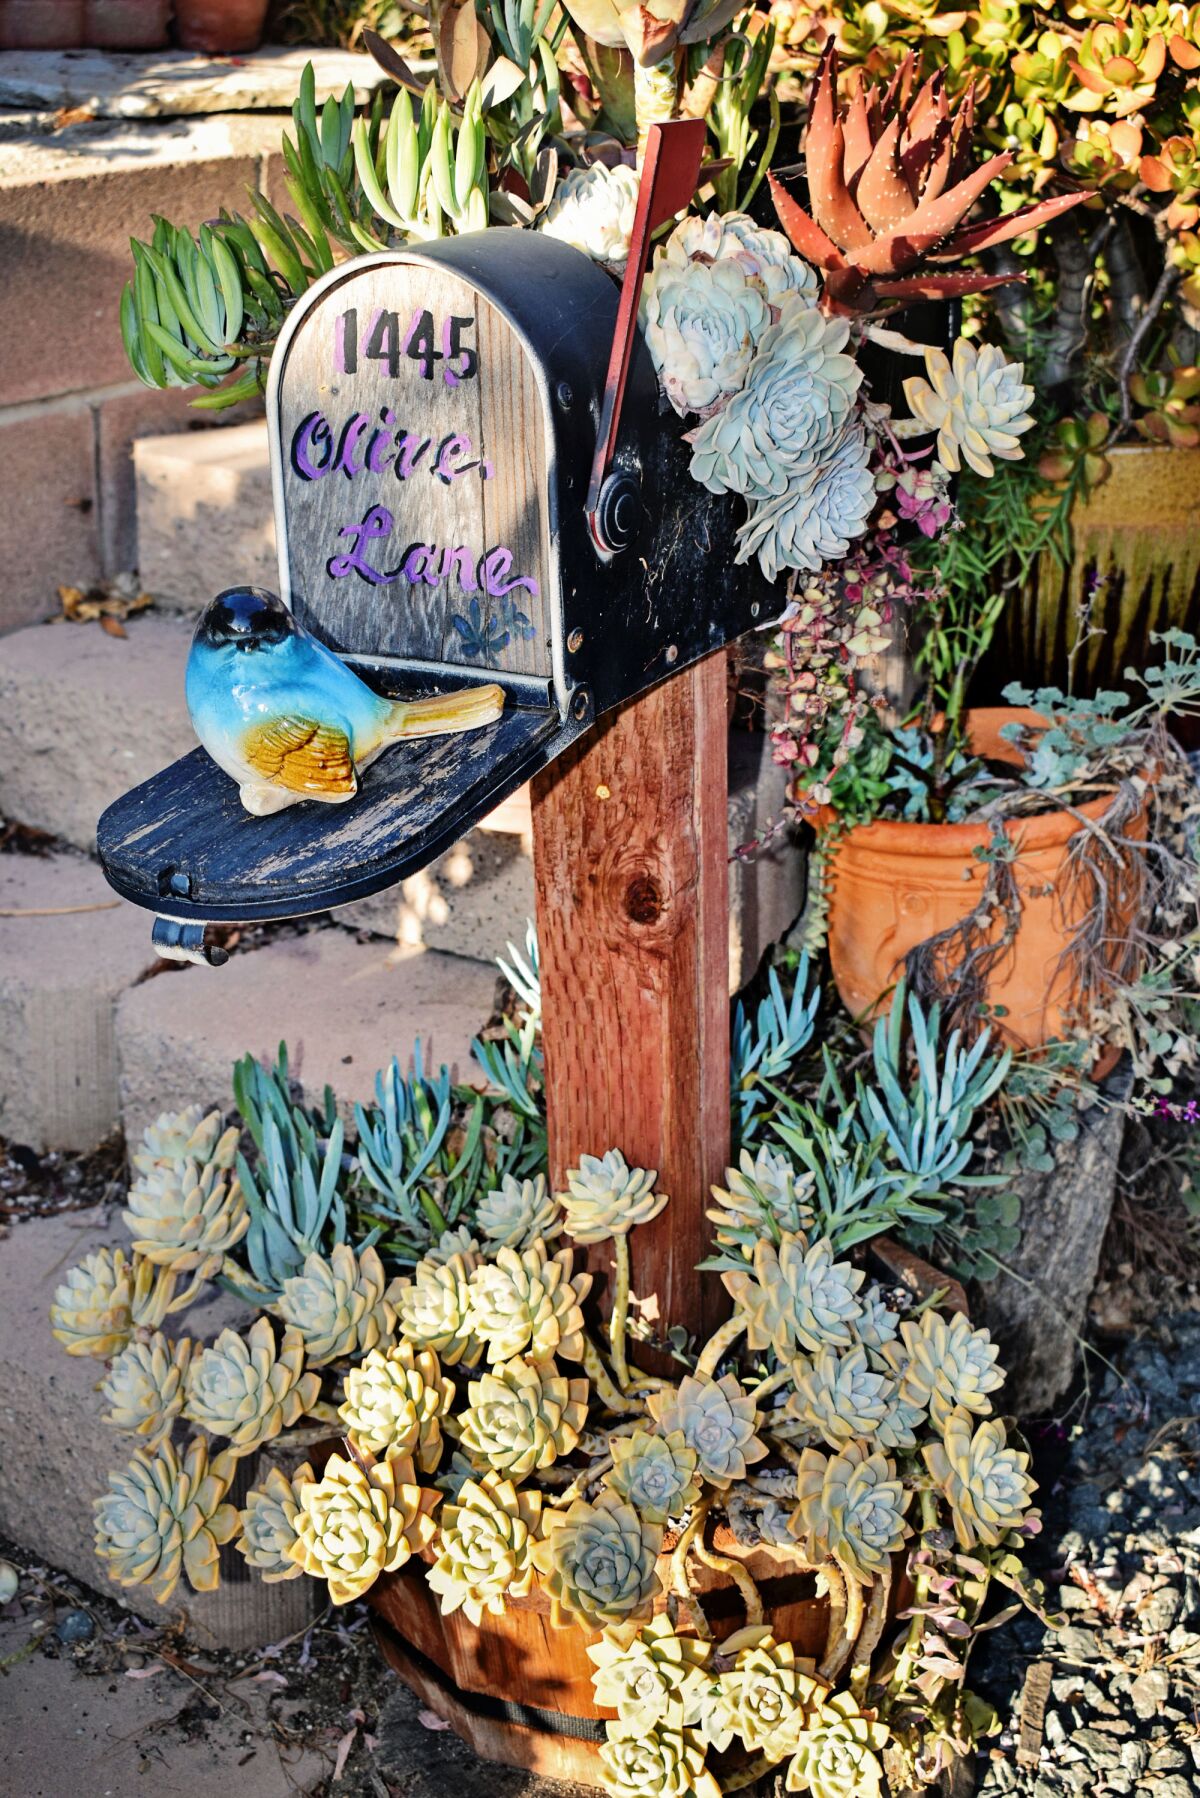 Olive Teodoro's husband, Arturo, transformed a discarded mailbox she found into a planter, which she adorned with succulents.